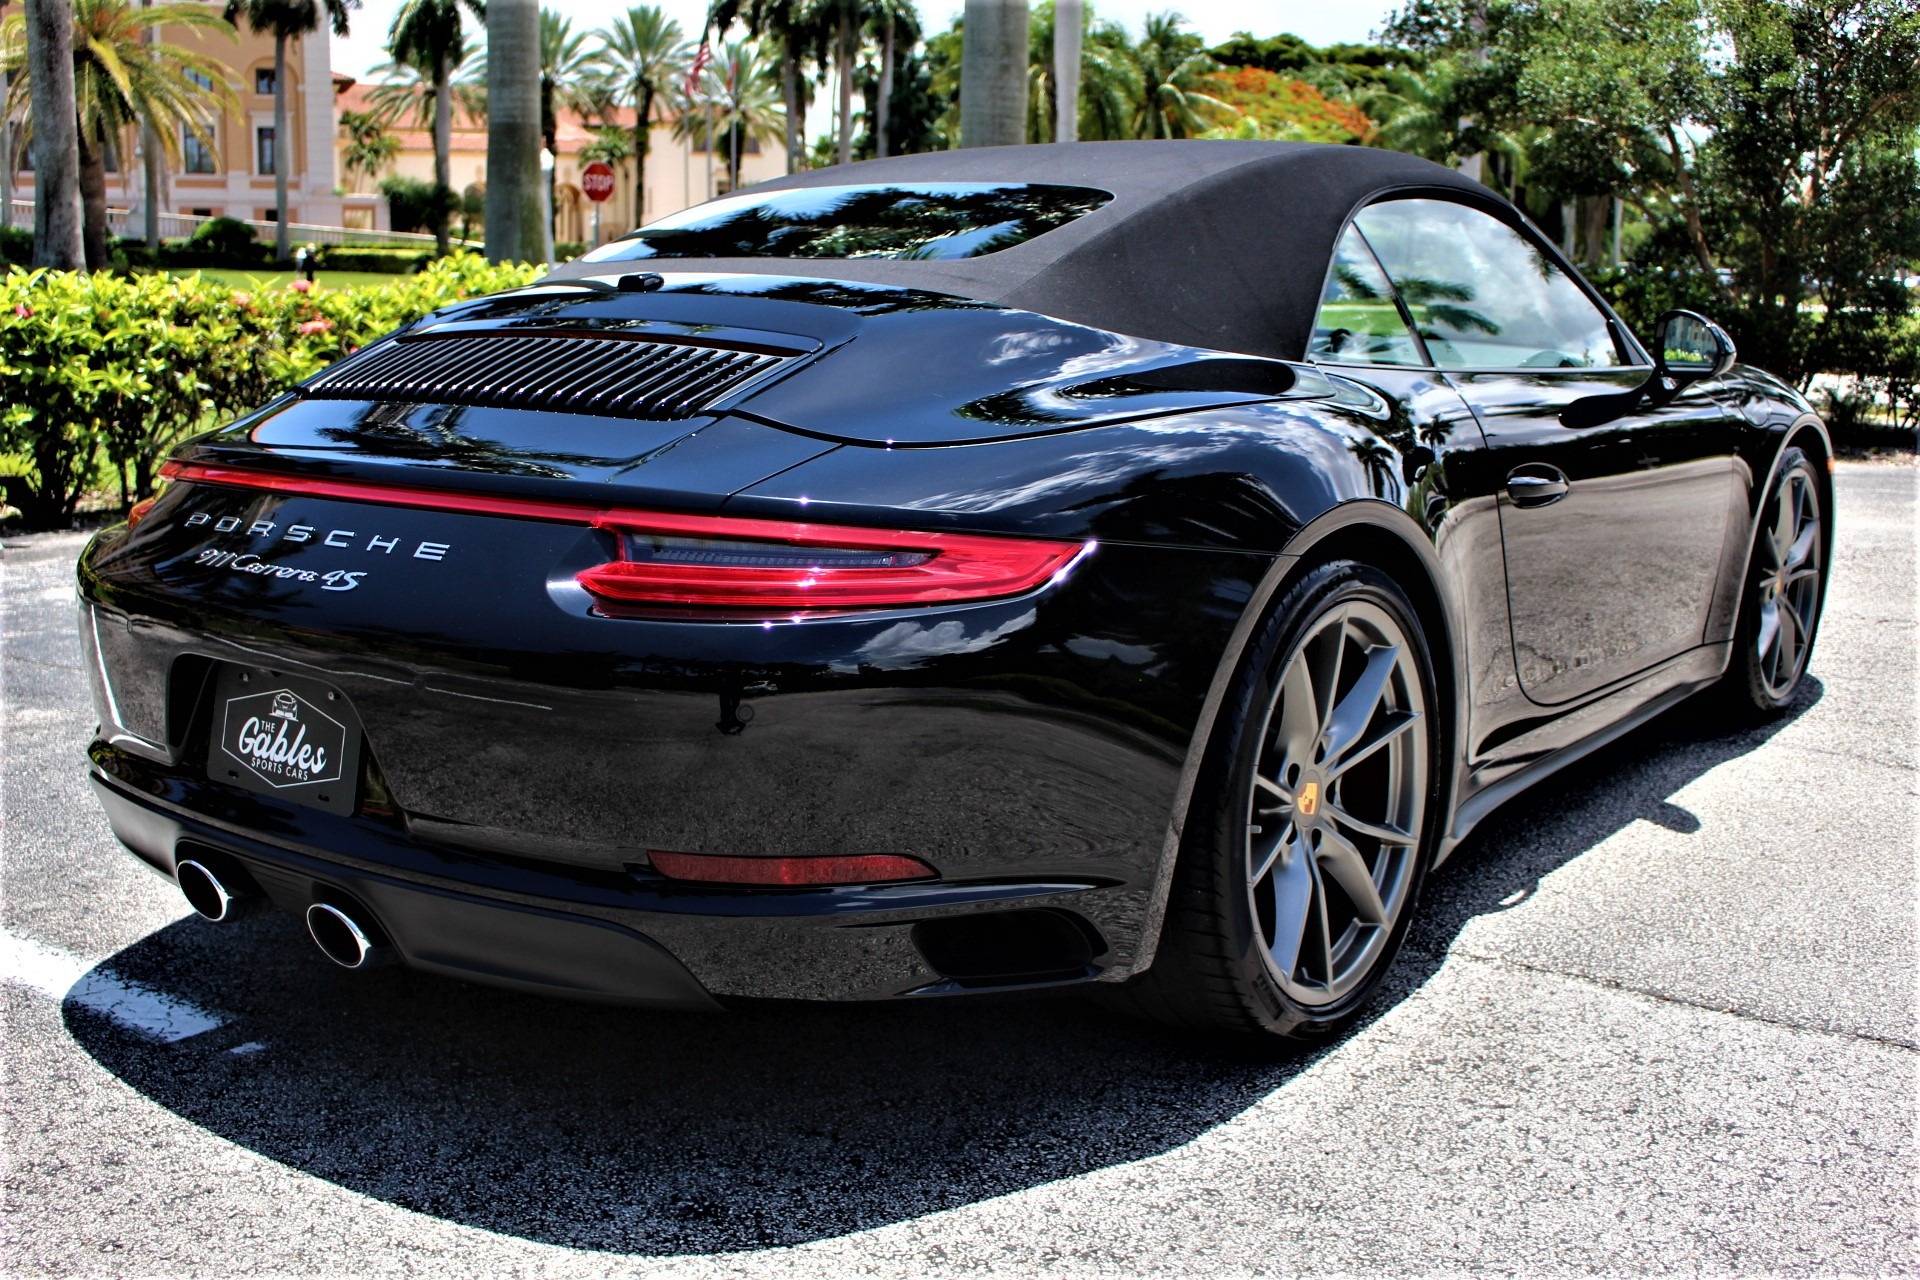 Used 2017 Porsche 911 Carrera 4S for sale Sold at The Gables Sports Cars in Miami FL 33146 4